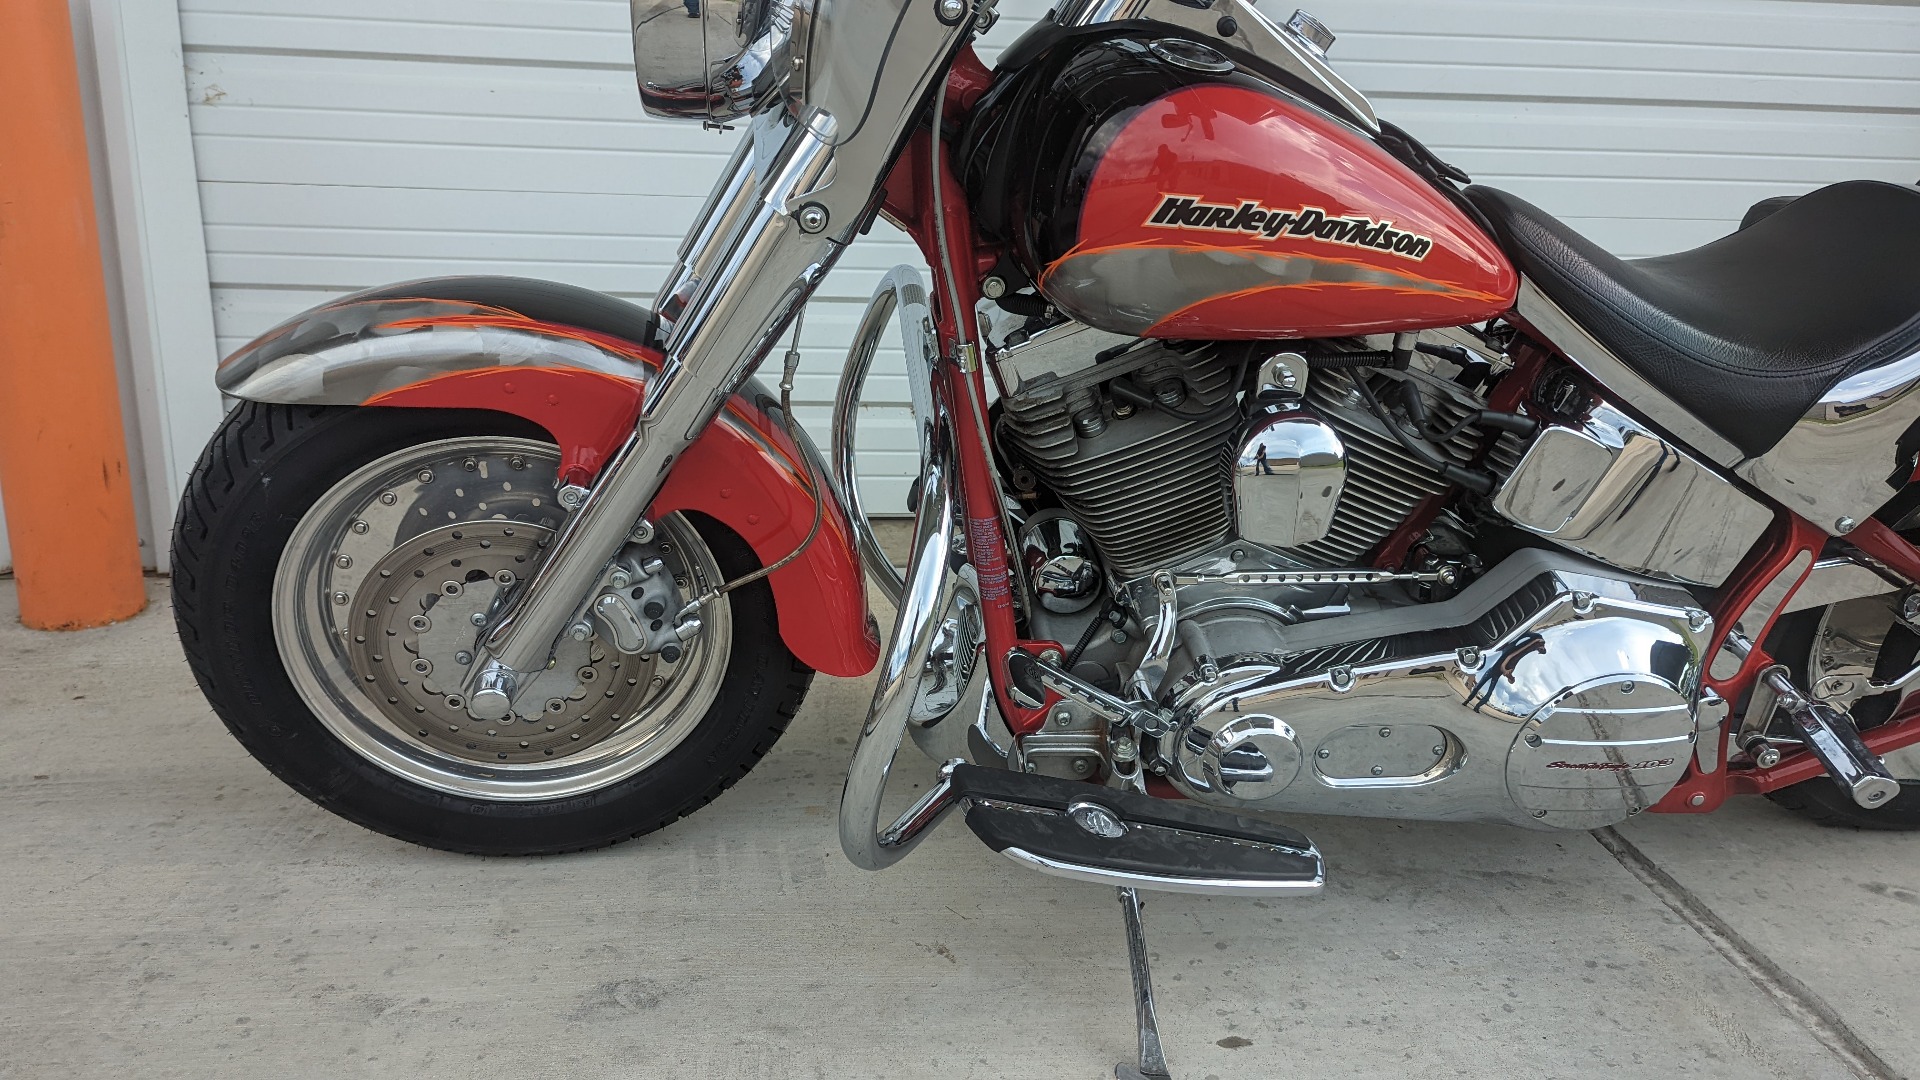 2005 harley fatboy for sale - Photo 6